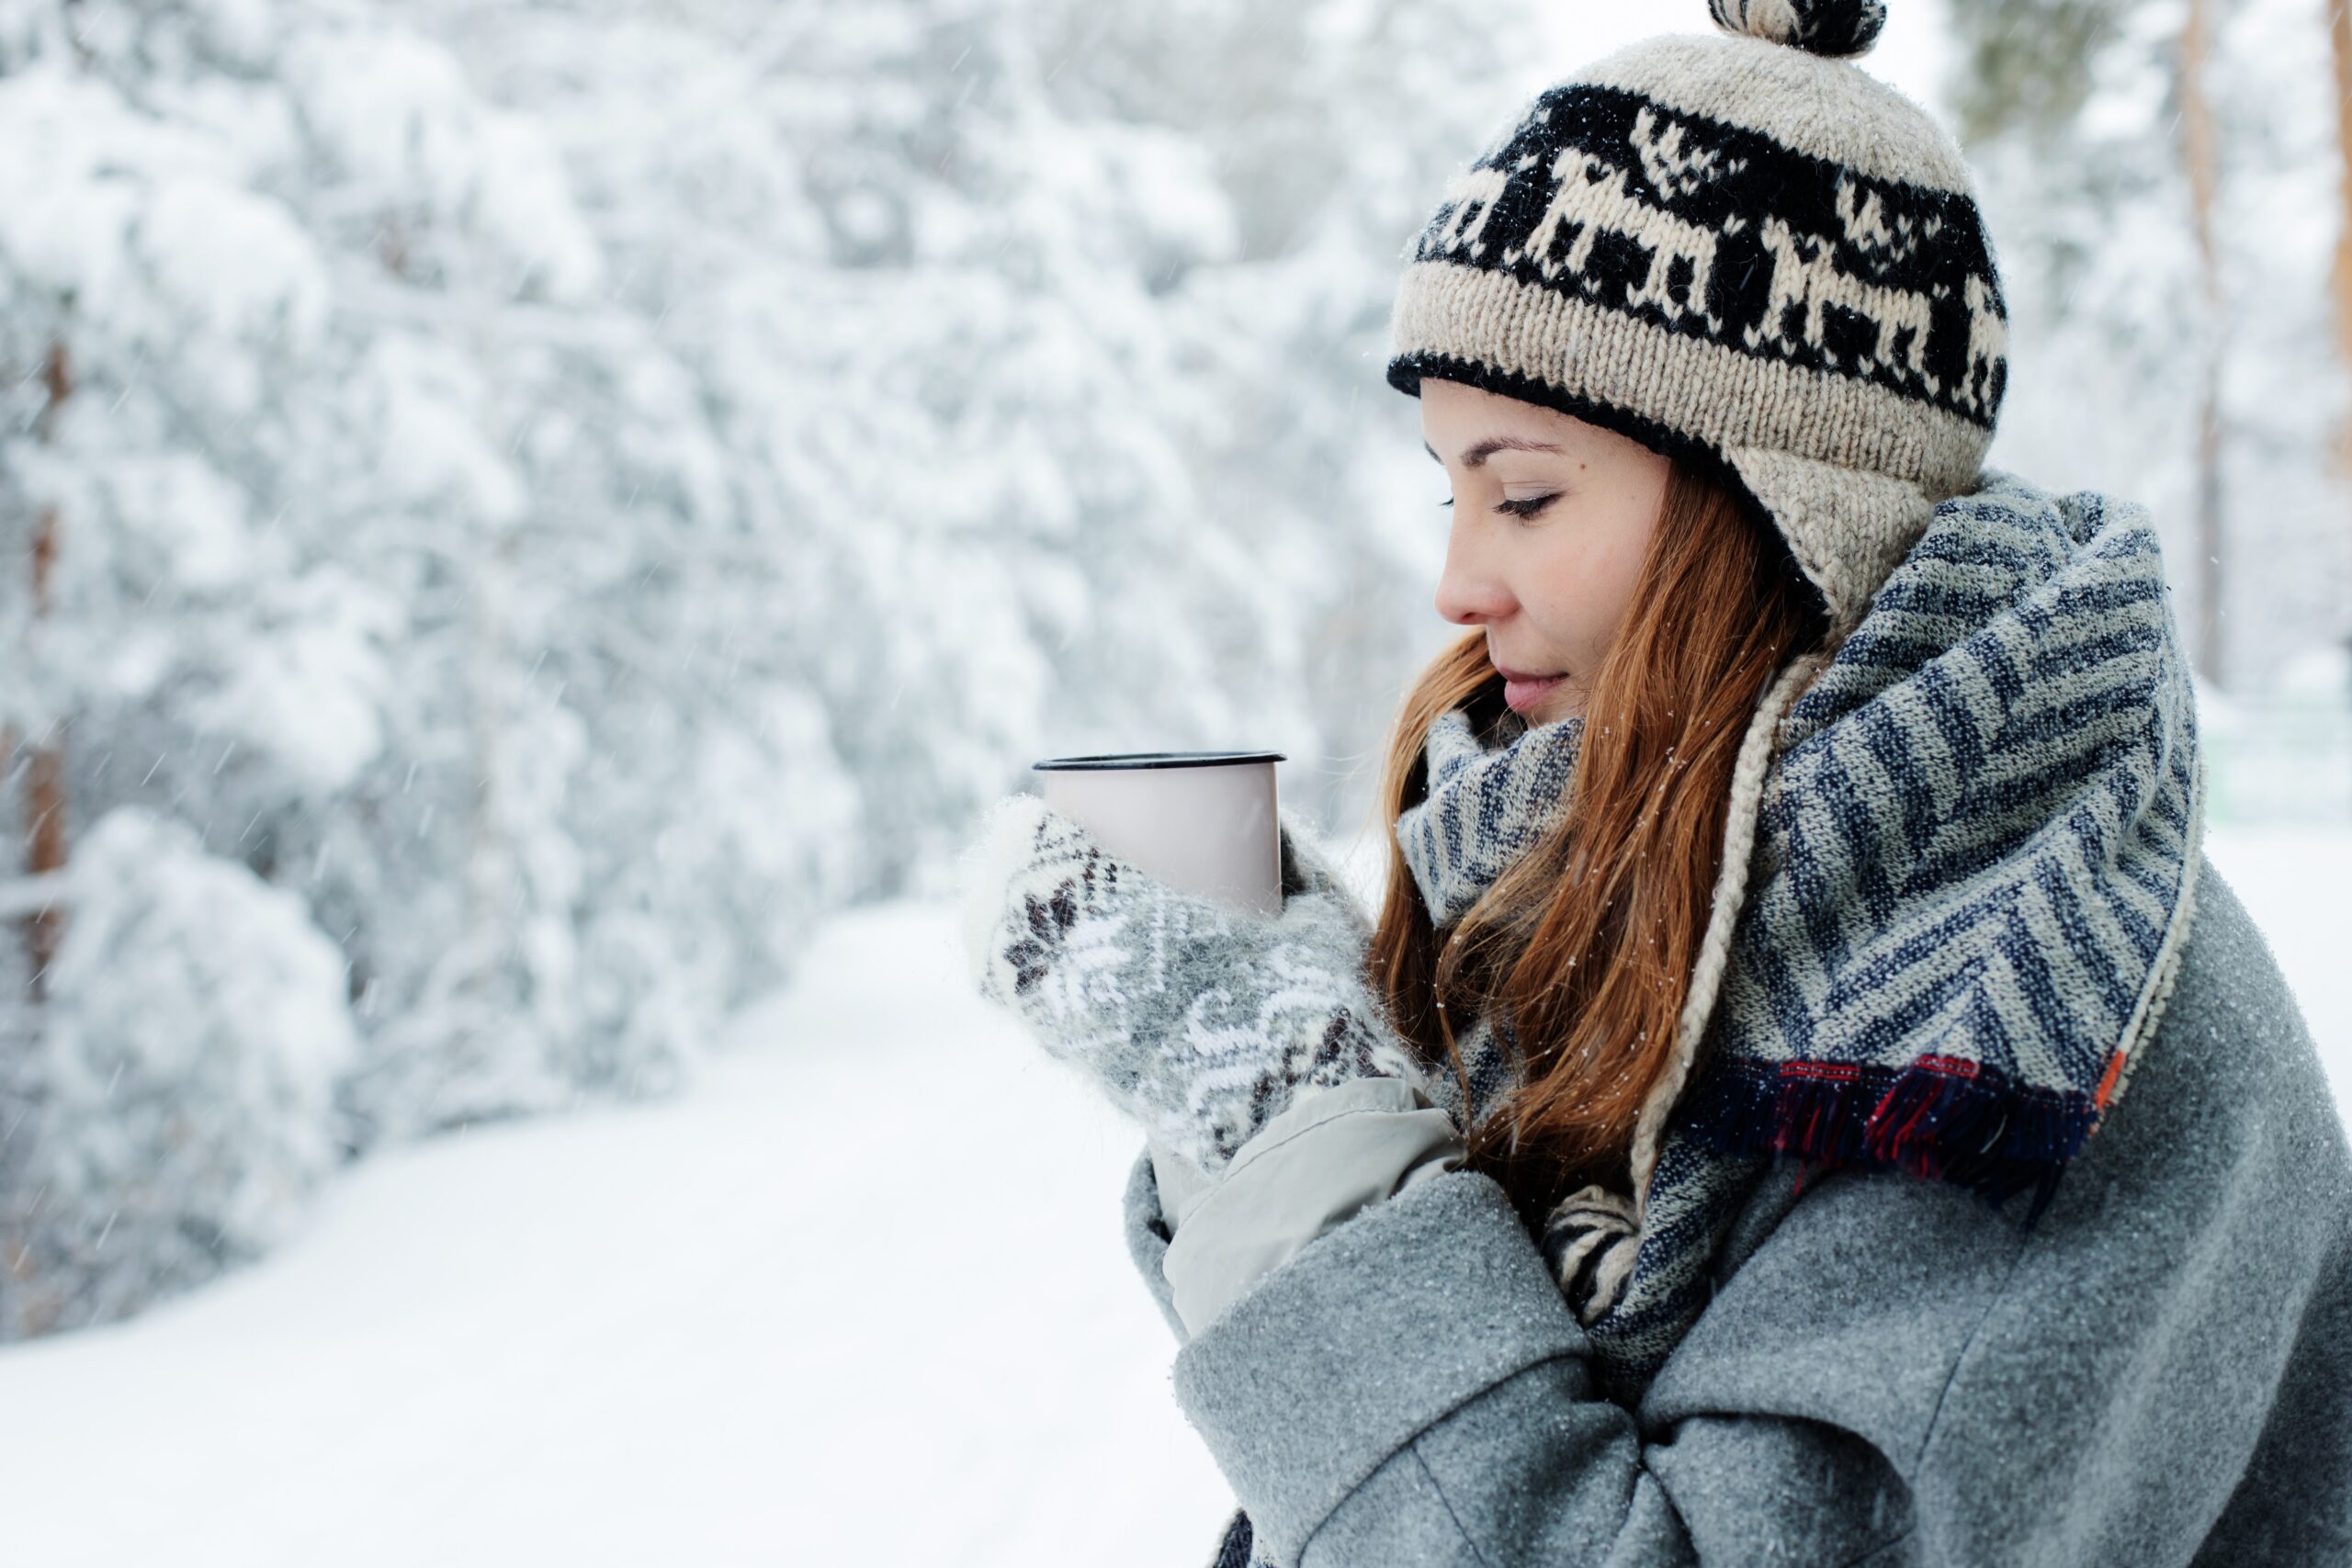 Woman dressed in jacket, mittens, and hat holding a mug outside on a snowy day.